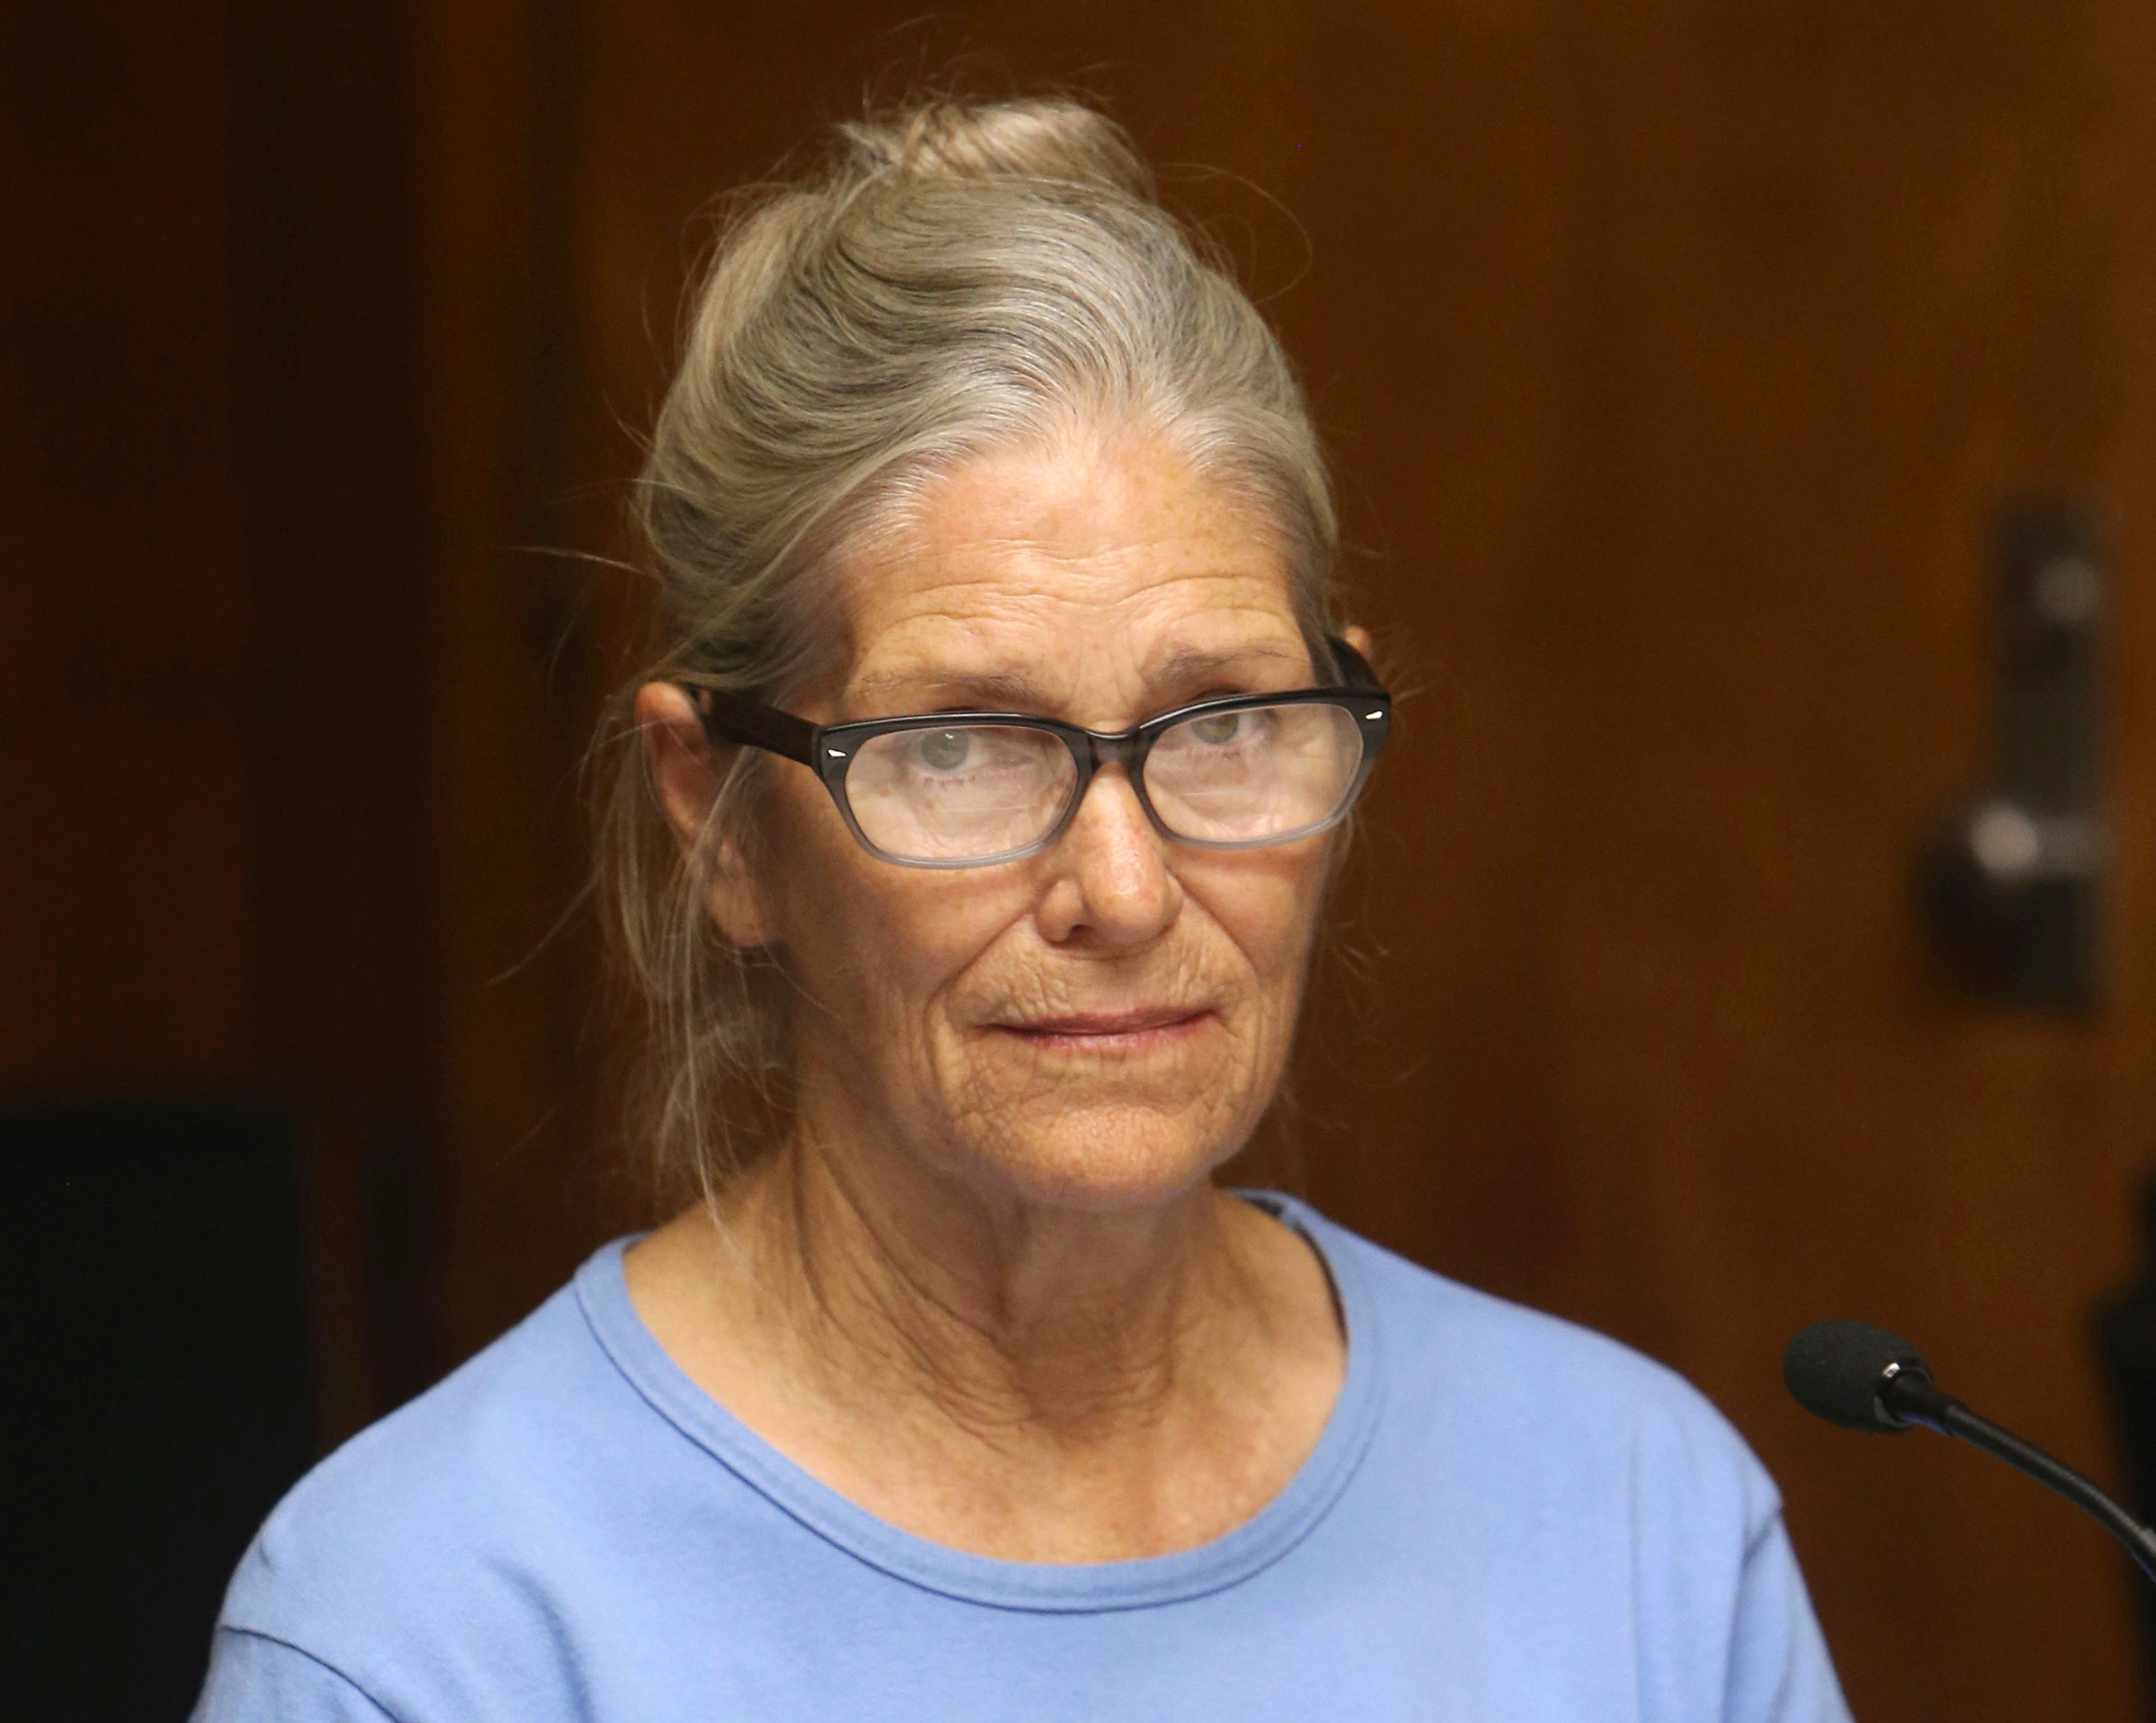 Leslie Van Houten attends her parole hearing at the California Institution for Women in Corona, Calif., on Sept. 6, 2017. (Stan Lim—Pool/The Orange County Register/AP)